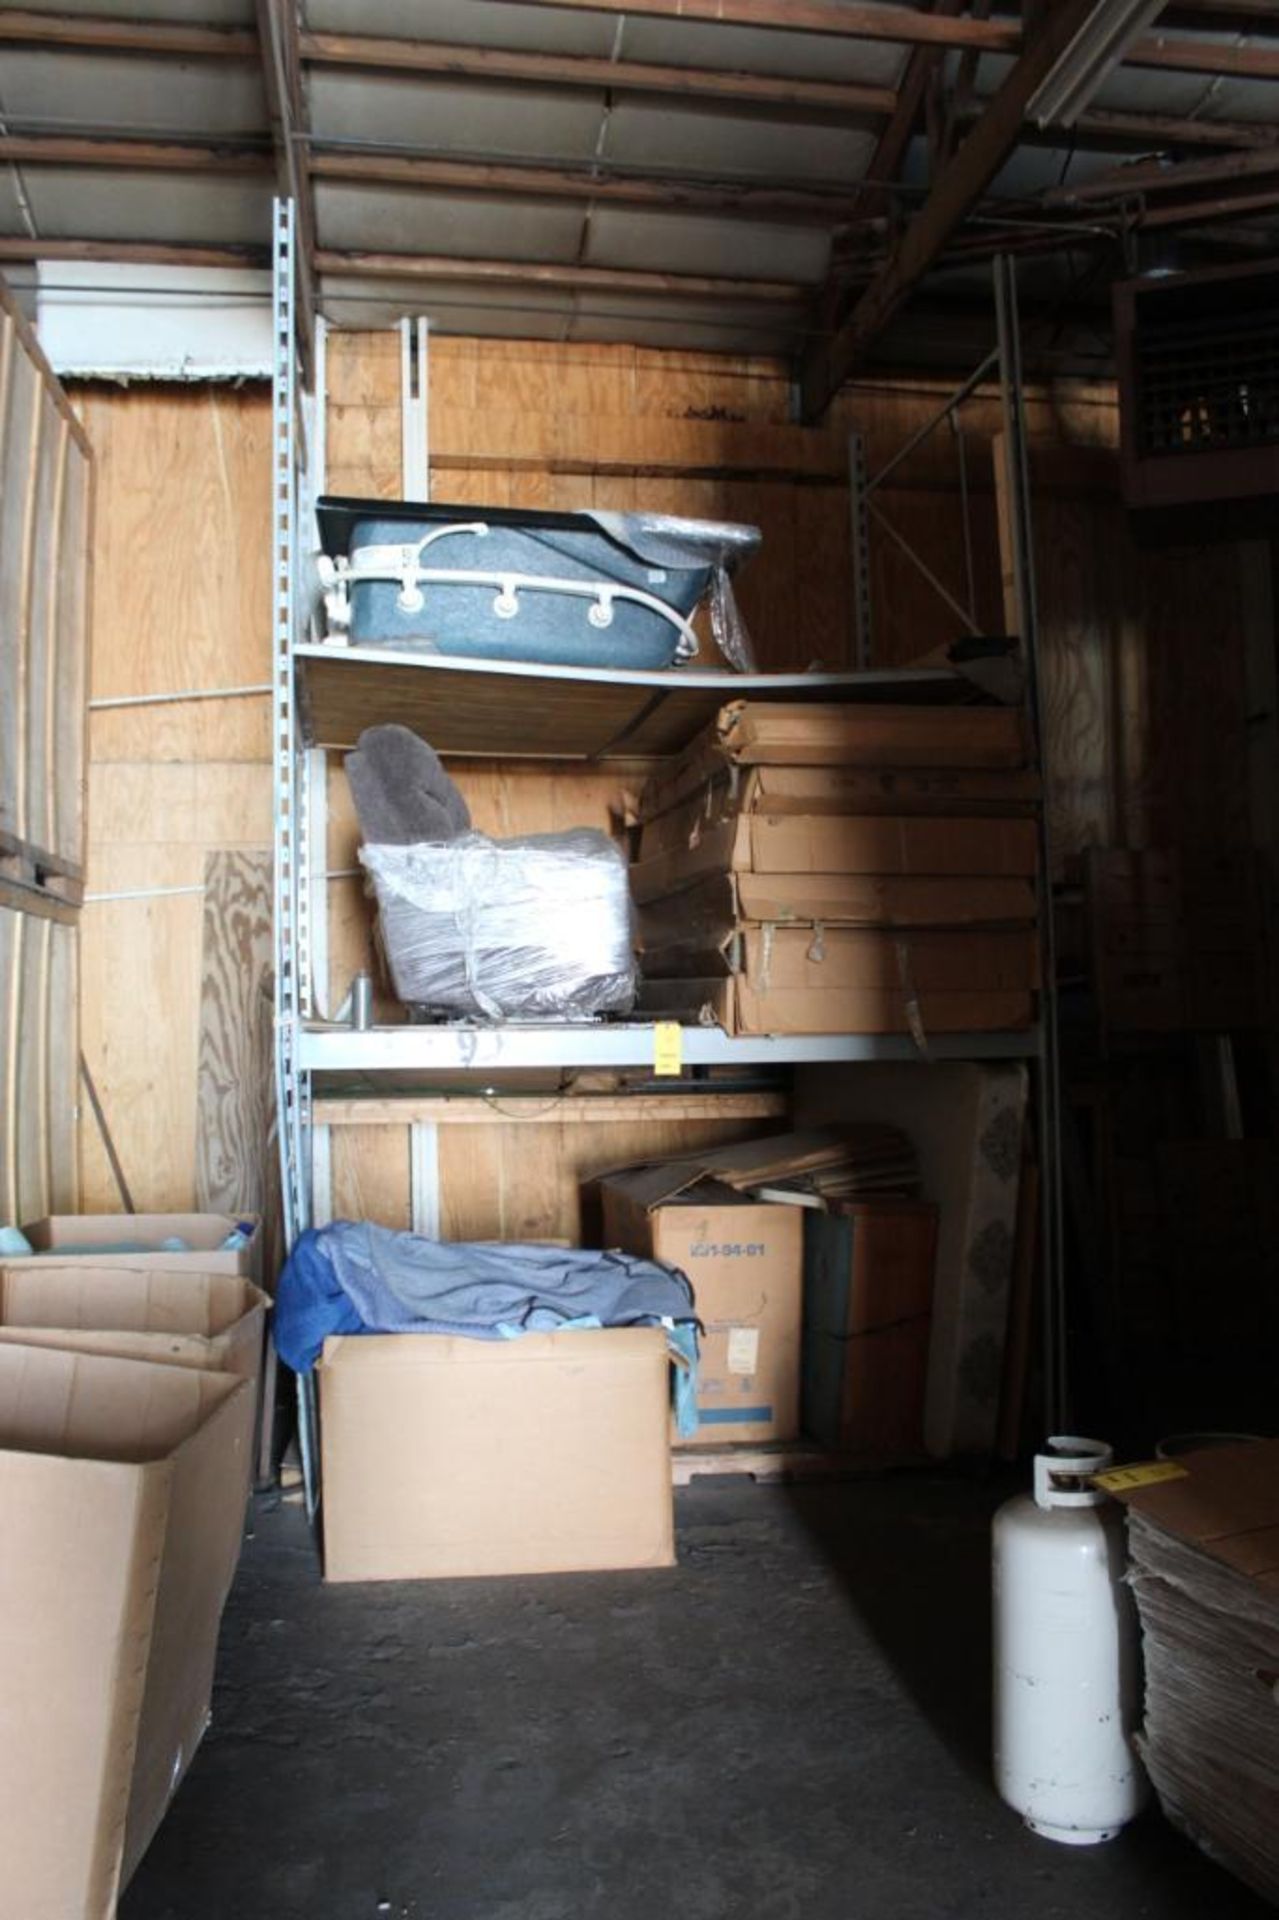 LOT: (2) Sets of Racking with Contents including Mattresses in Box, Moving Blankets in (8) Boxes (ho